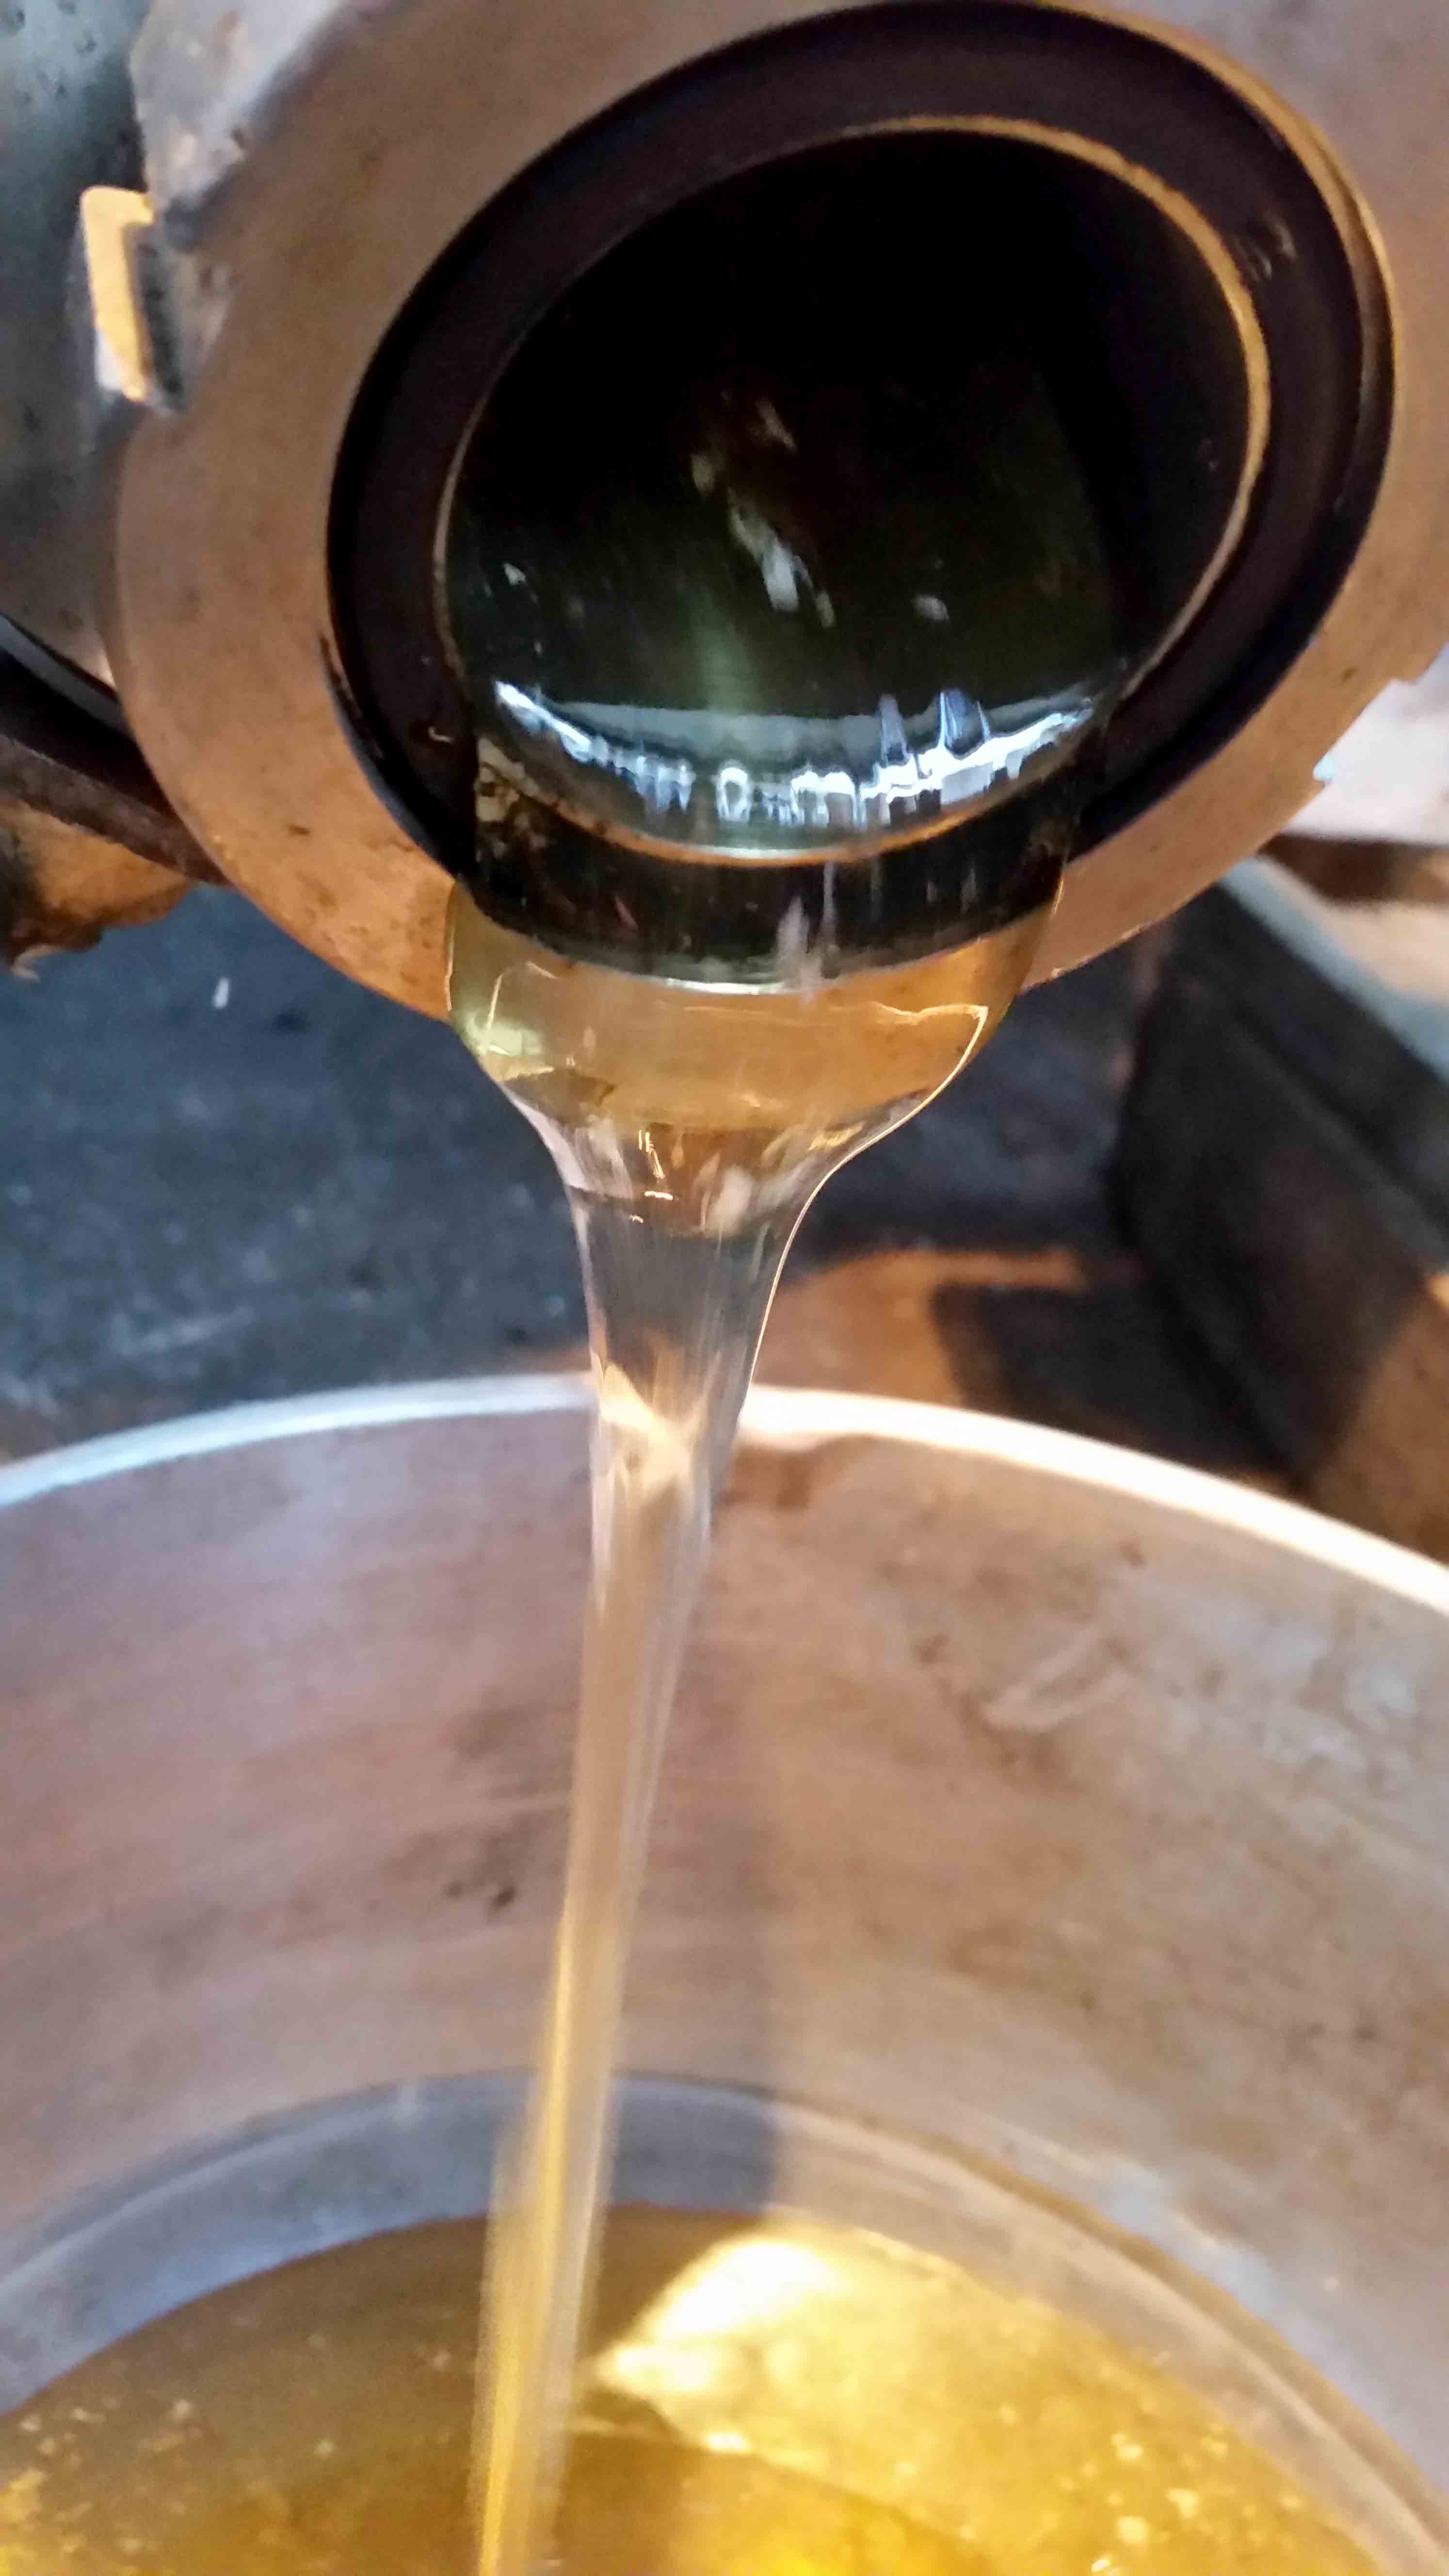 Honey Being Poured From An Extractor - Greenside Up